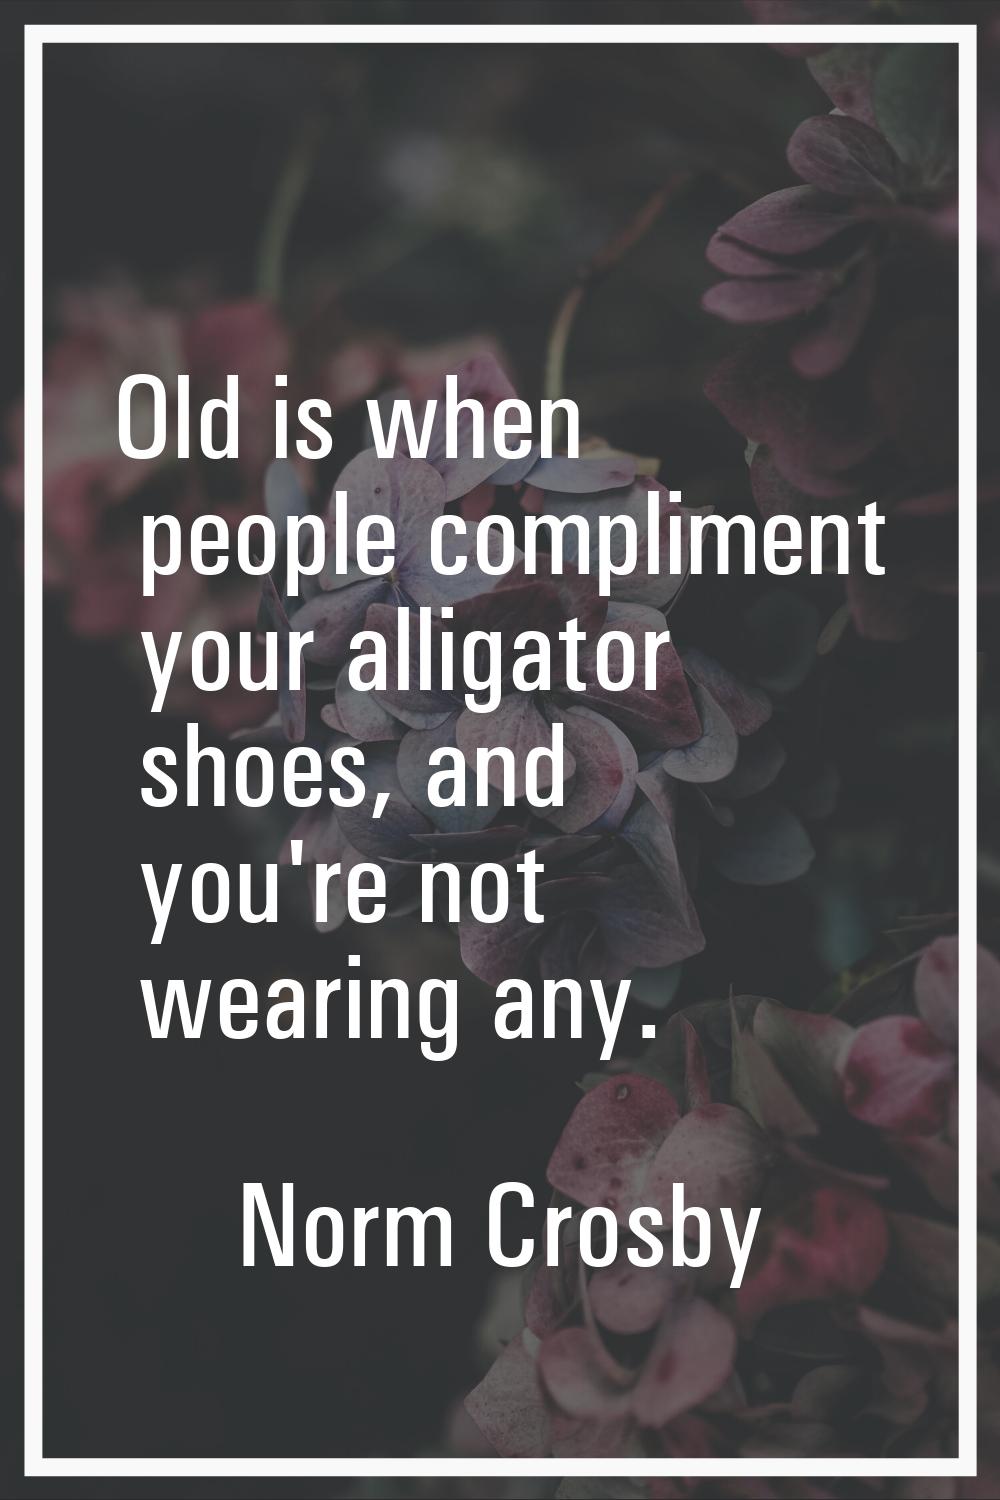 Old is when people compliment your alligator shoes, and you're not wearing any.